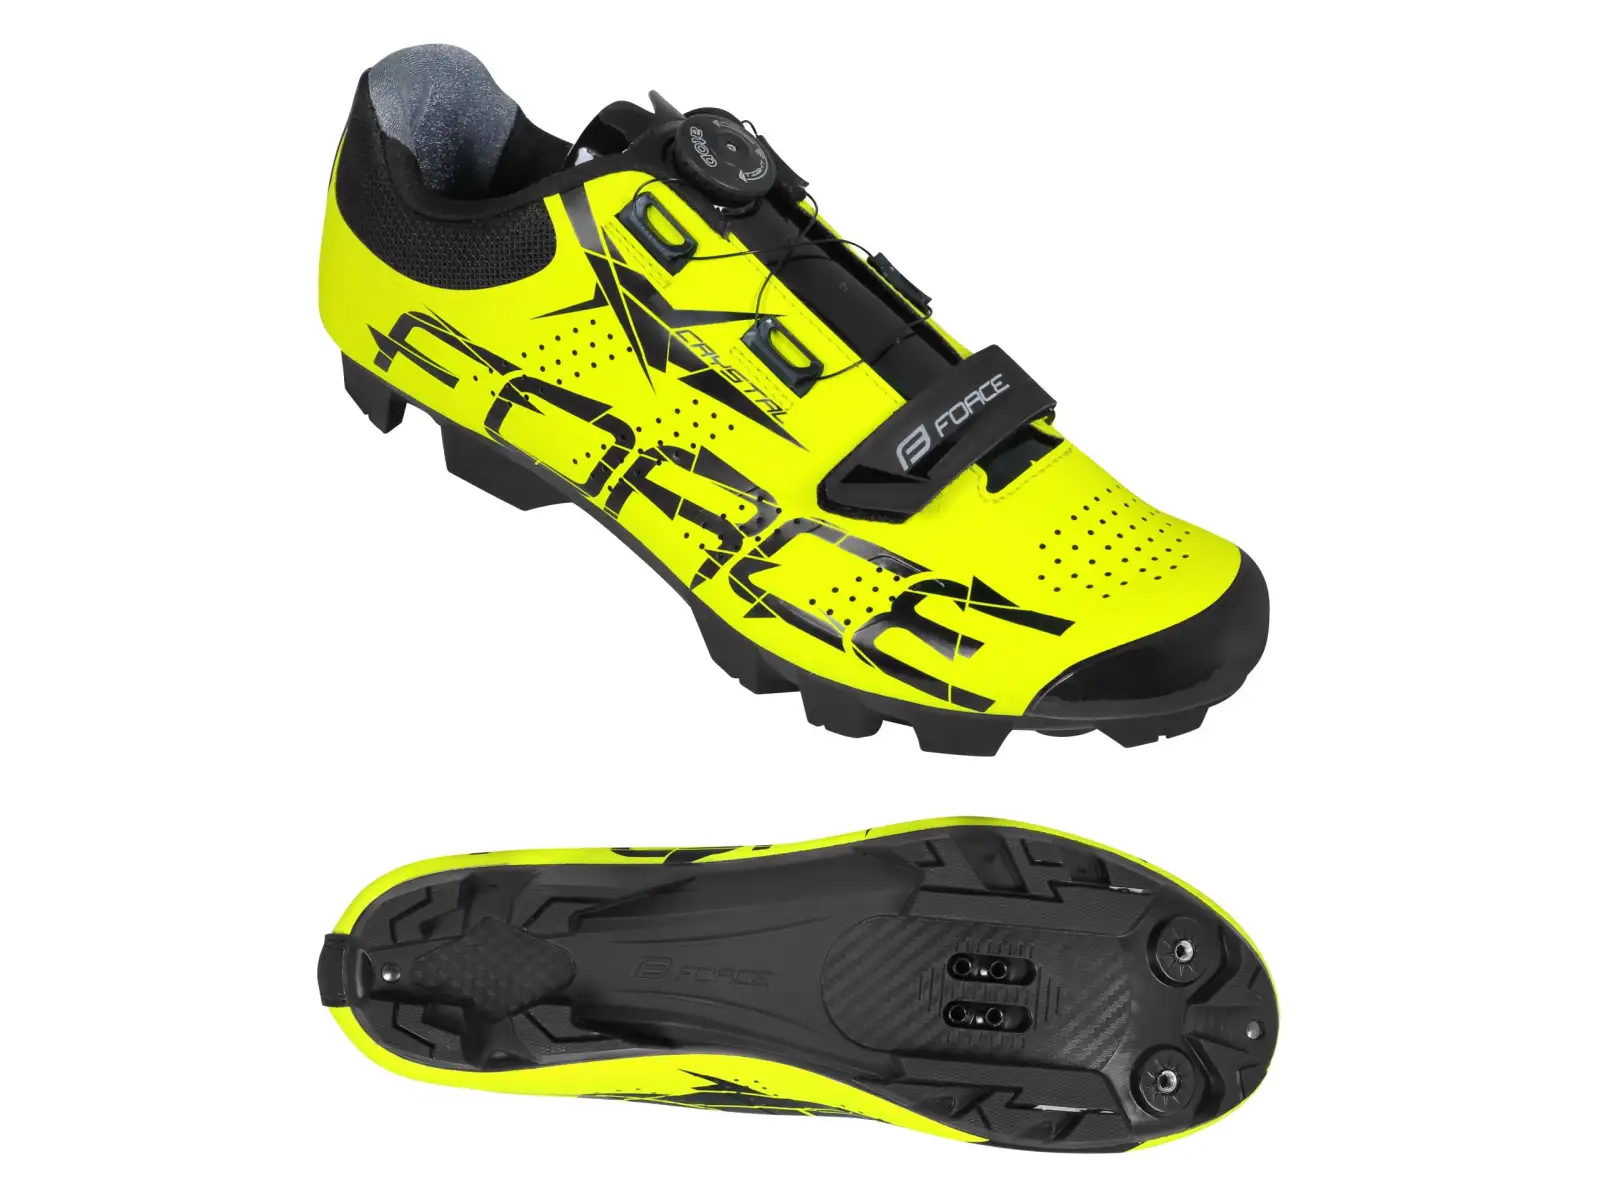 Force Crystal MTB tretry fluo